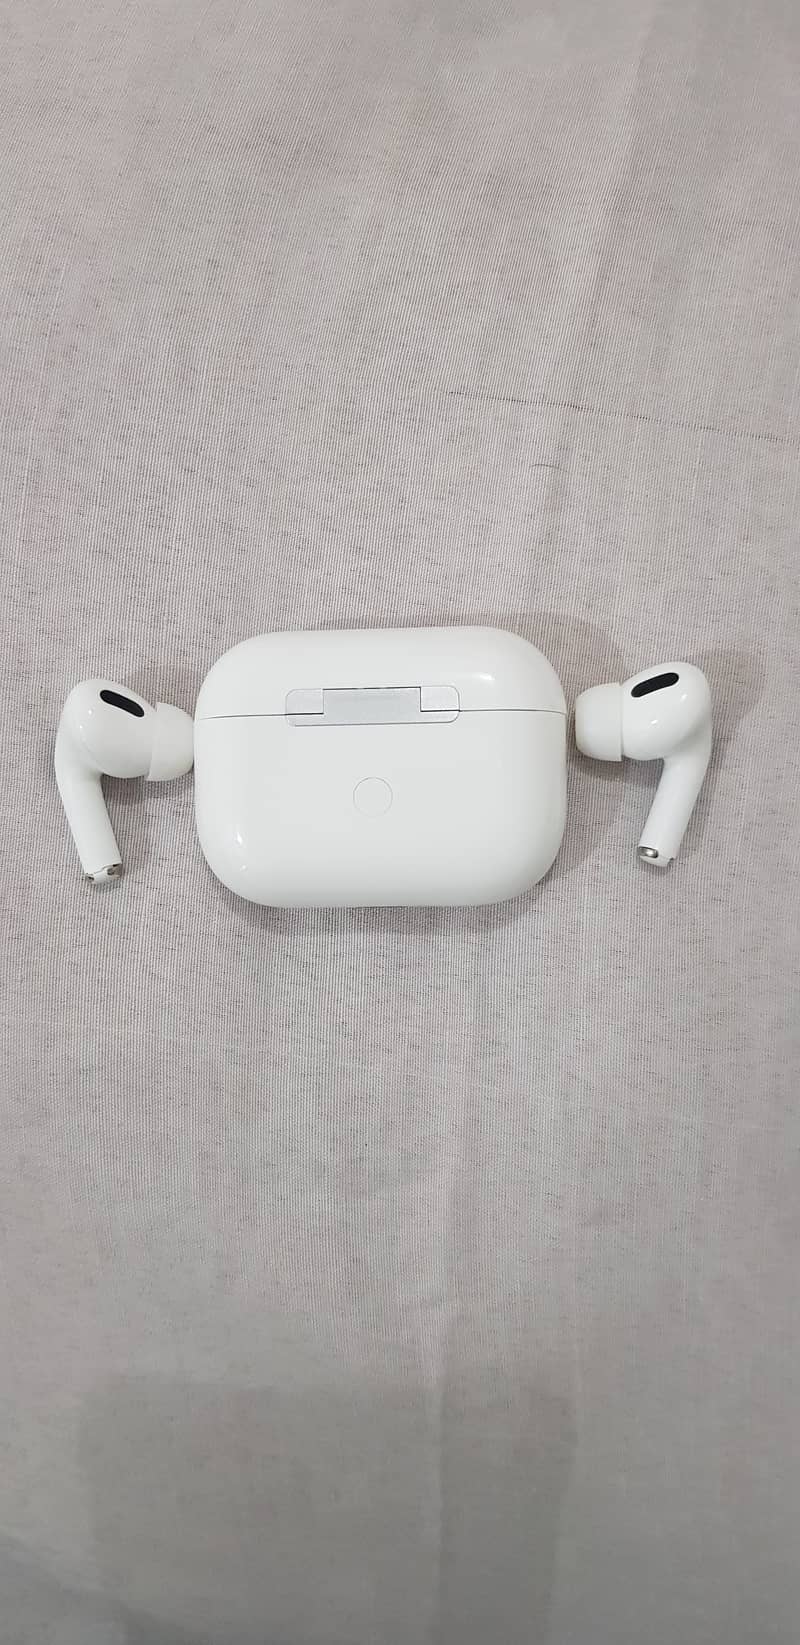 Airpods Pro 3rd Gen ( TWS ) 10/10 Condition no any single fault 3